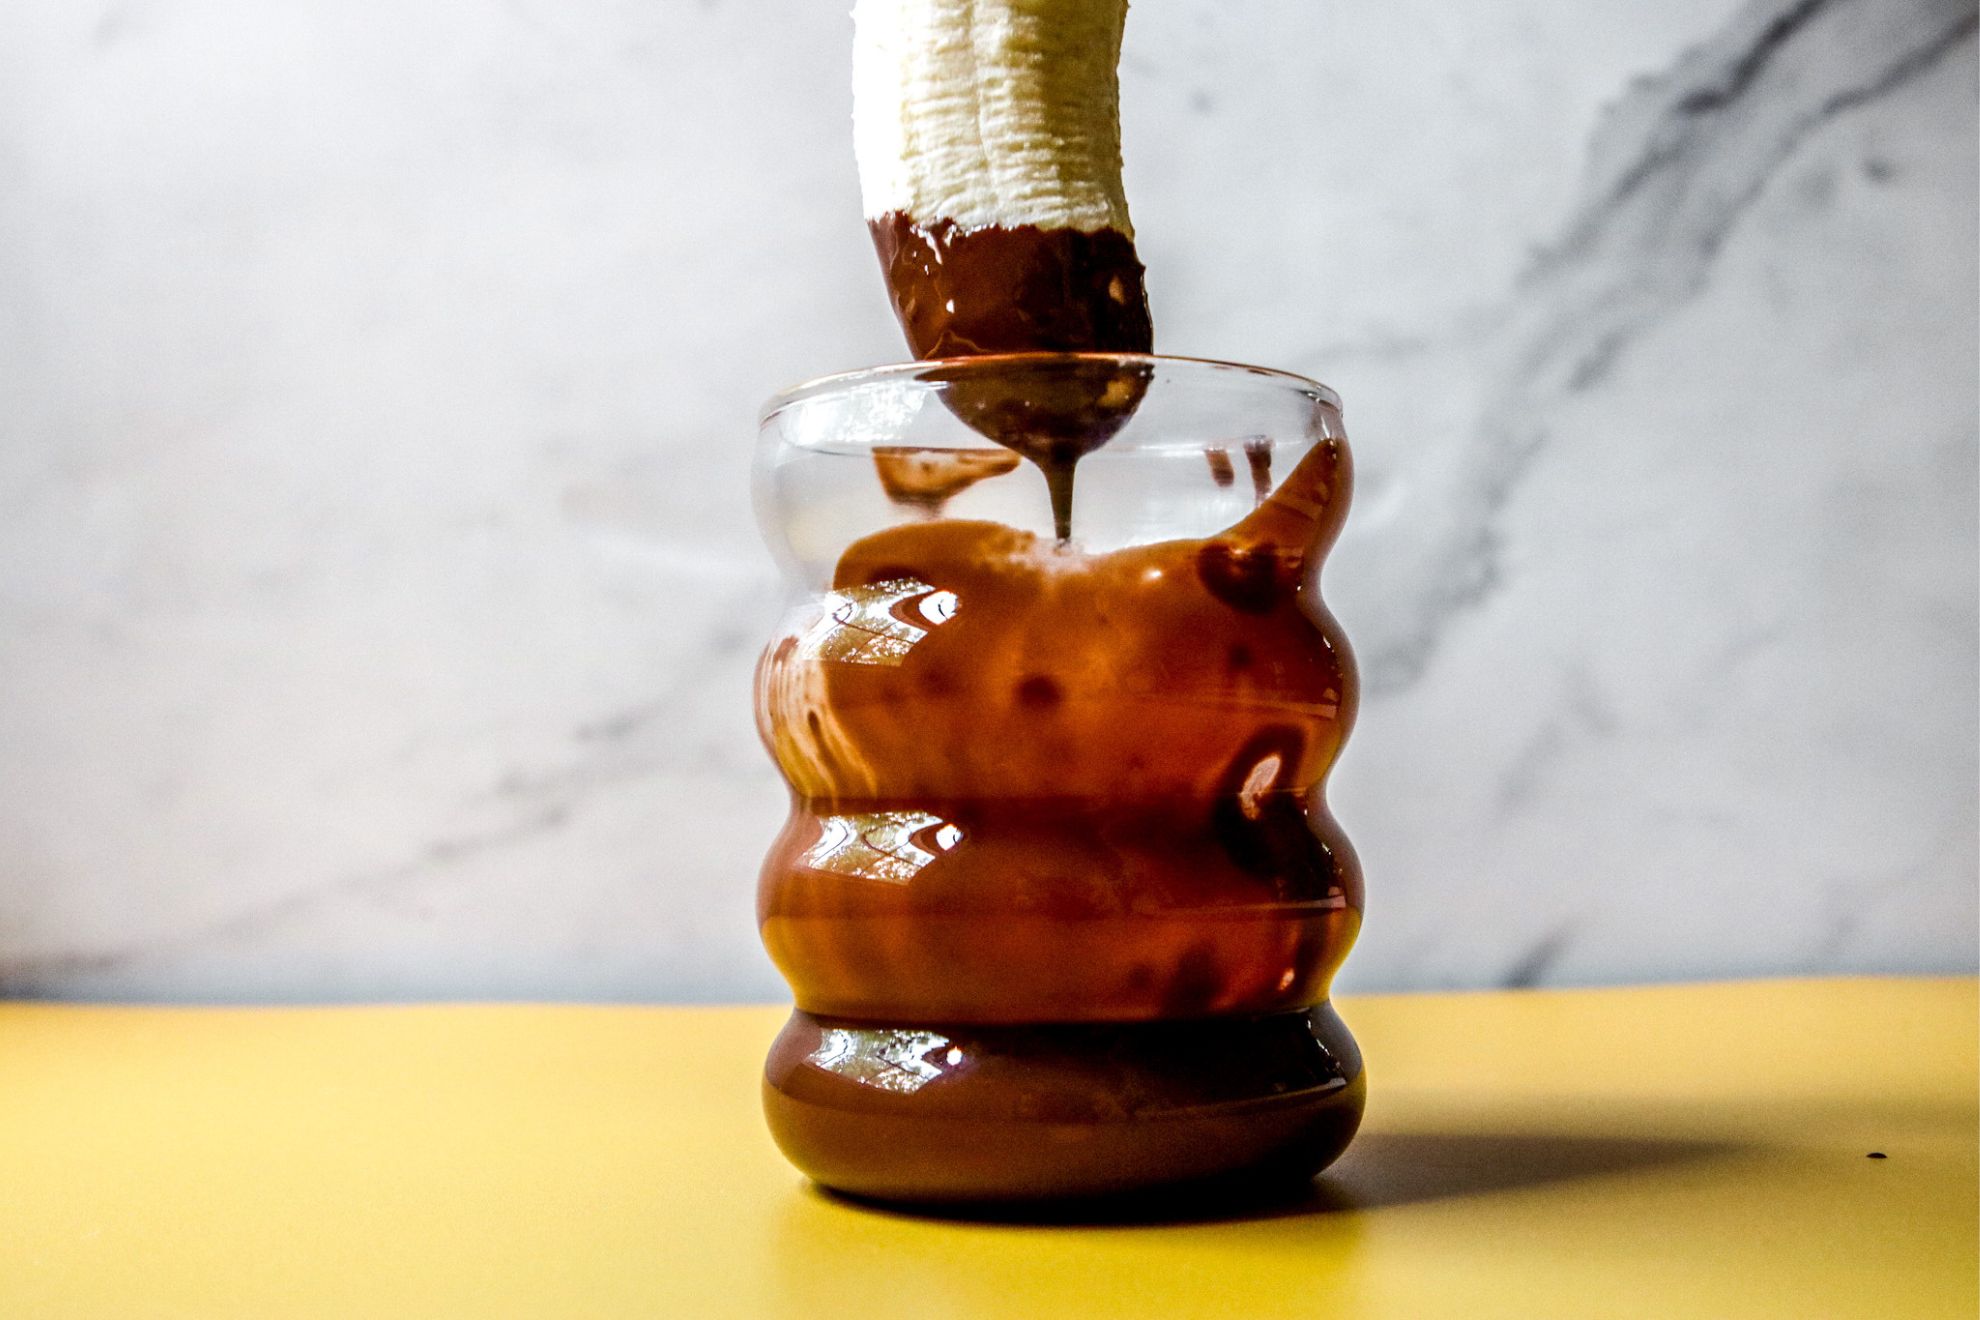 This is a horizontal image looking at a cup from the side. The cup is on a yellow surface with a white marble background. In the cup is melted chocolate. A banana is coming from the top center of the image and appears to have just been inserted into the chocolate cup as there is melted chocolate on the top of the banana and dripping off into the cup.